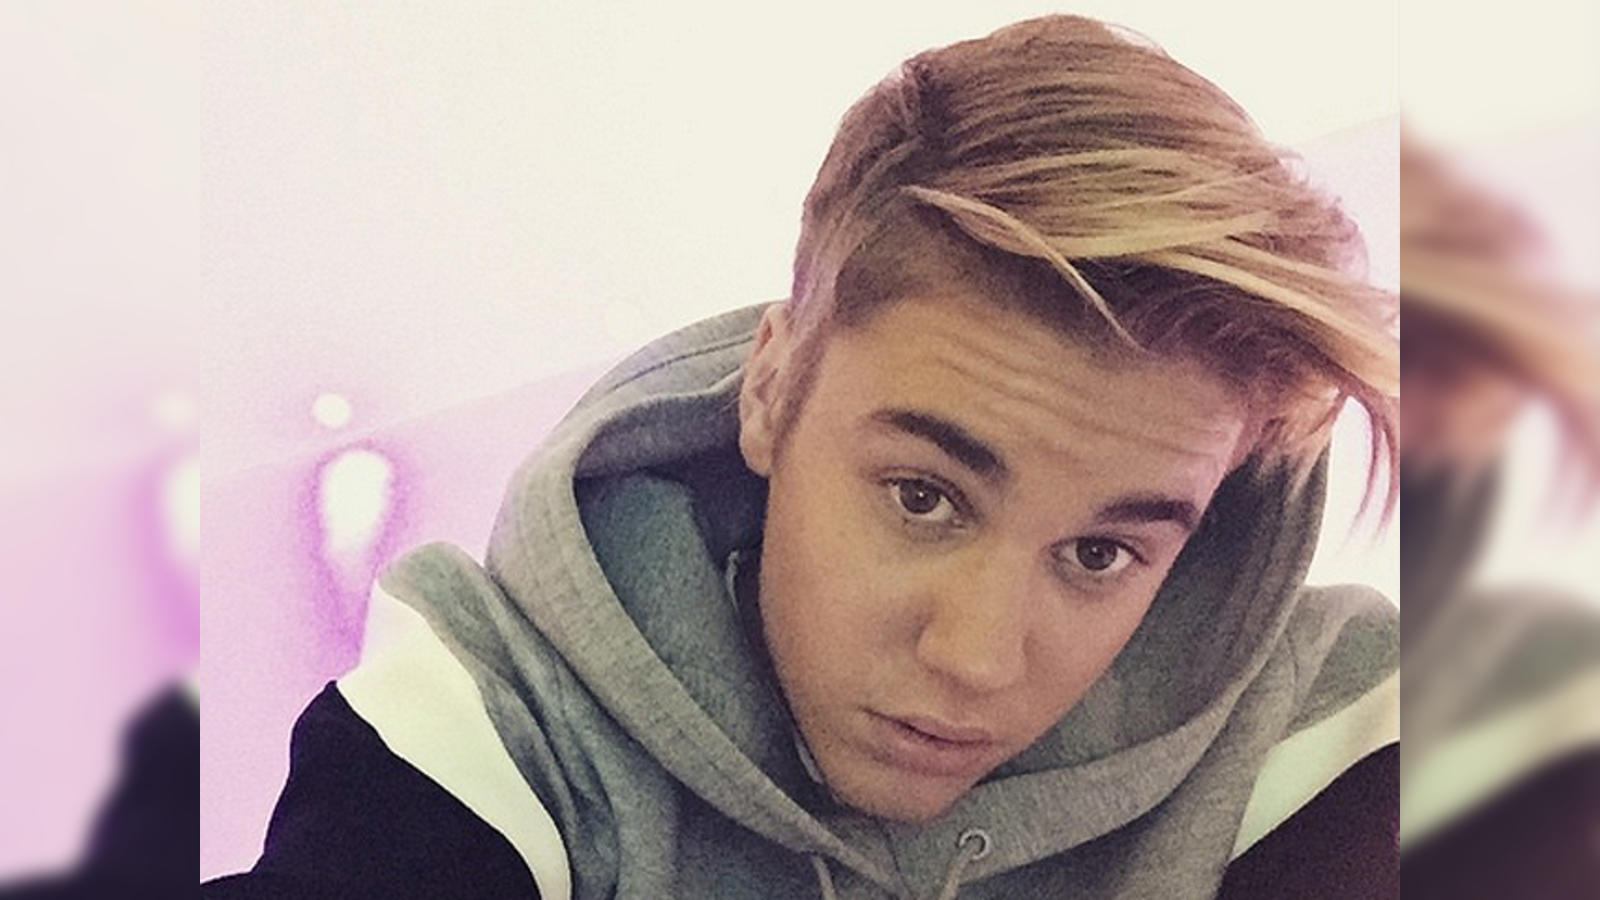 Justin Bieber Hair Transplant: From Balding Rumors to Iconic Looks